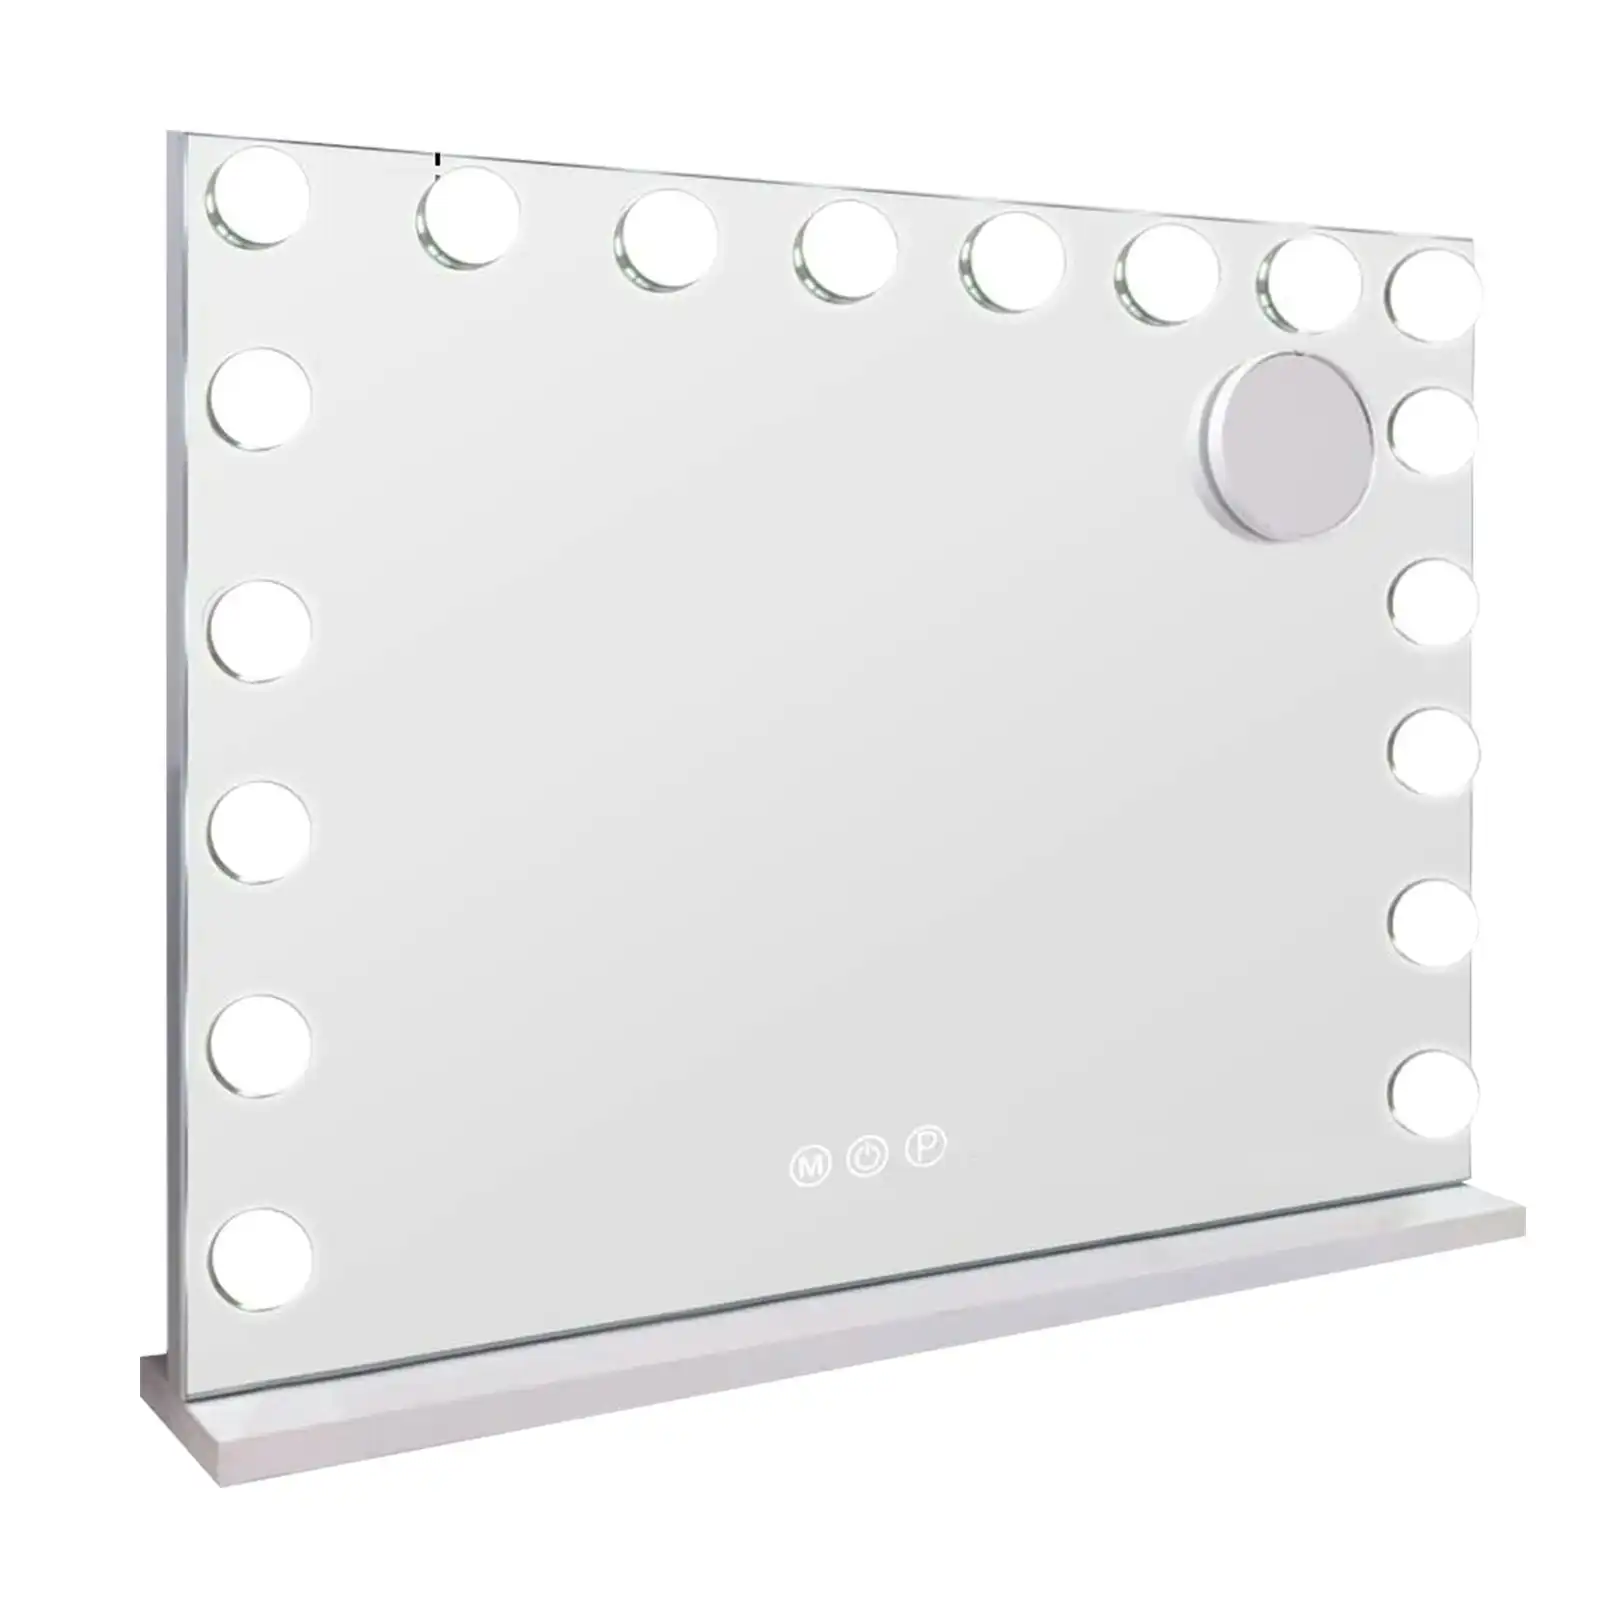 Viviendo Hollywood LED Lighted Makeup Mirror with 18 Dimmable Bulbs, Tabletop or Wall-Mounted, White